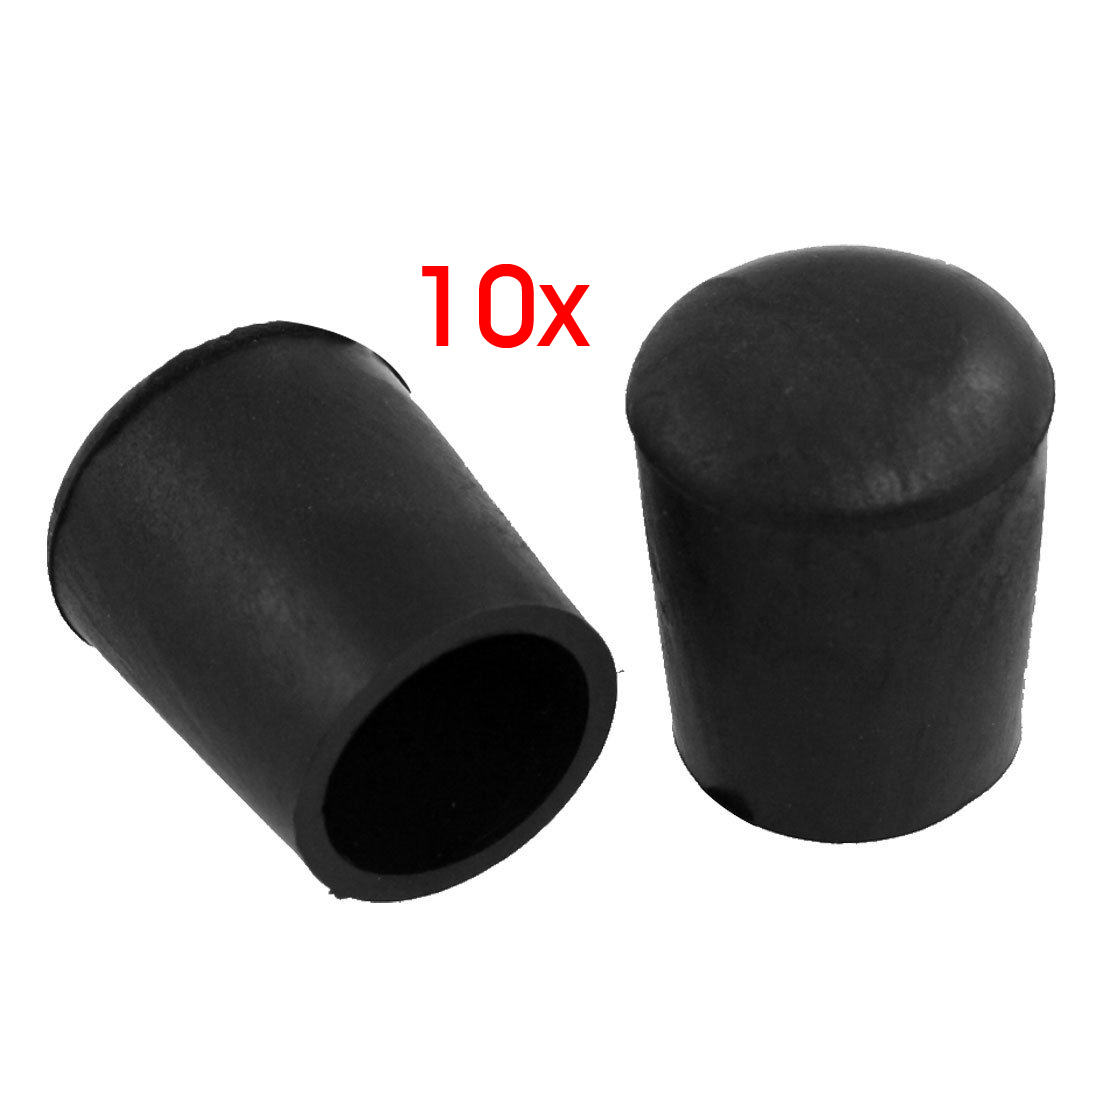 10 Pcs Furniture Chair Table Leg 18mm Rubber Foot Covers